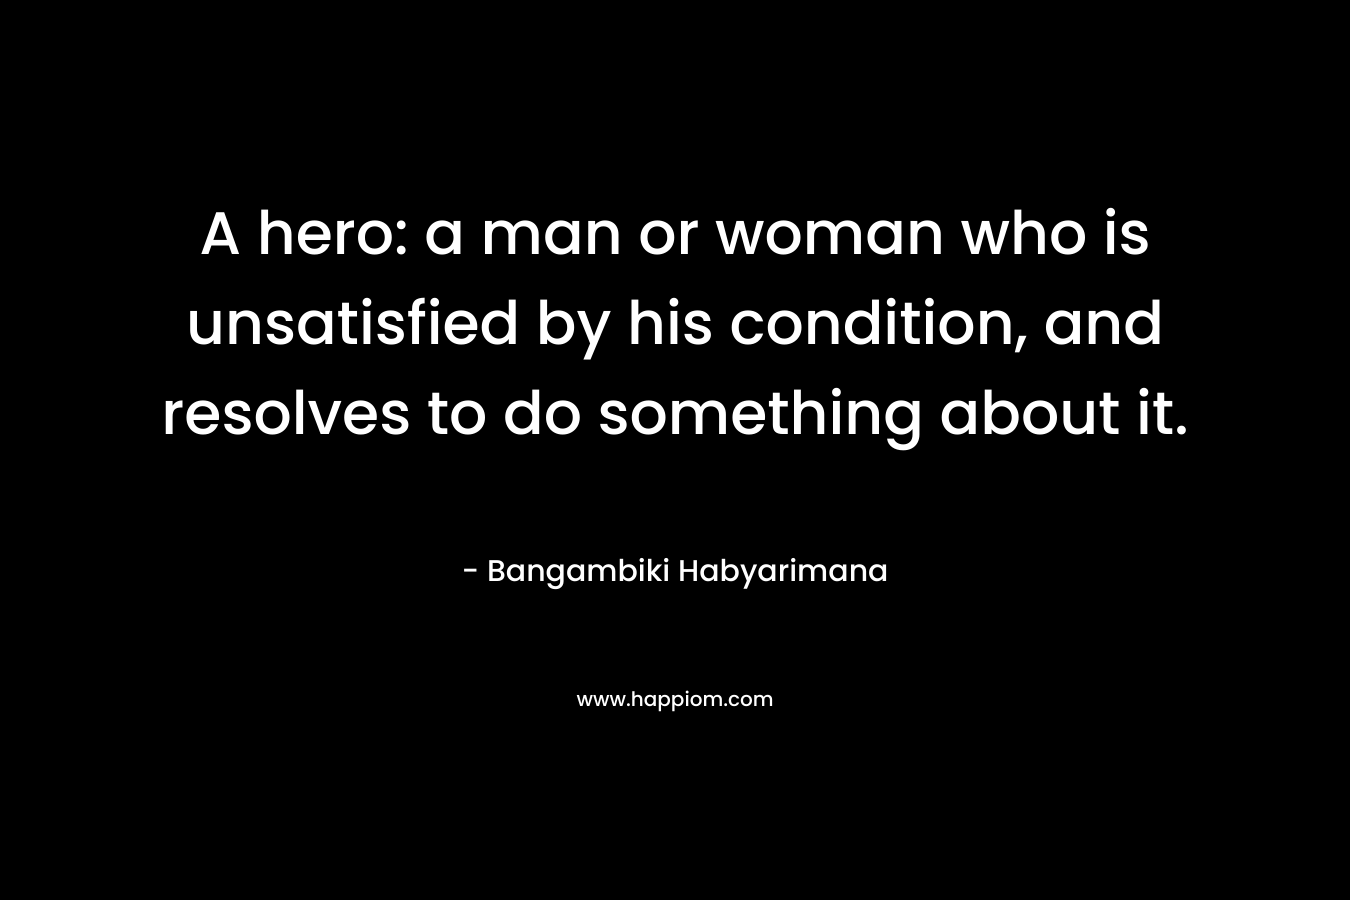 A hero: a man or woman who is unsatisfied by his condition, and resolves to do something about it.